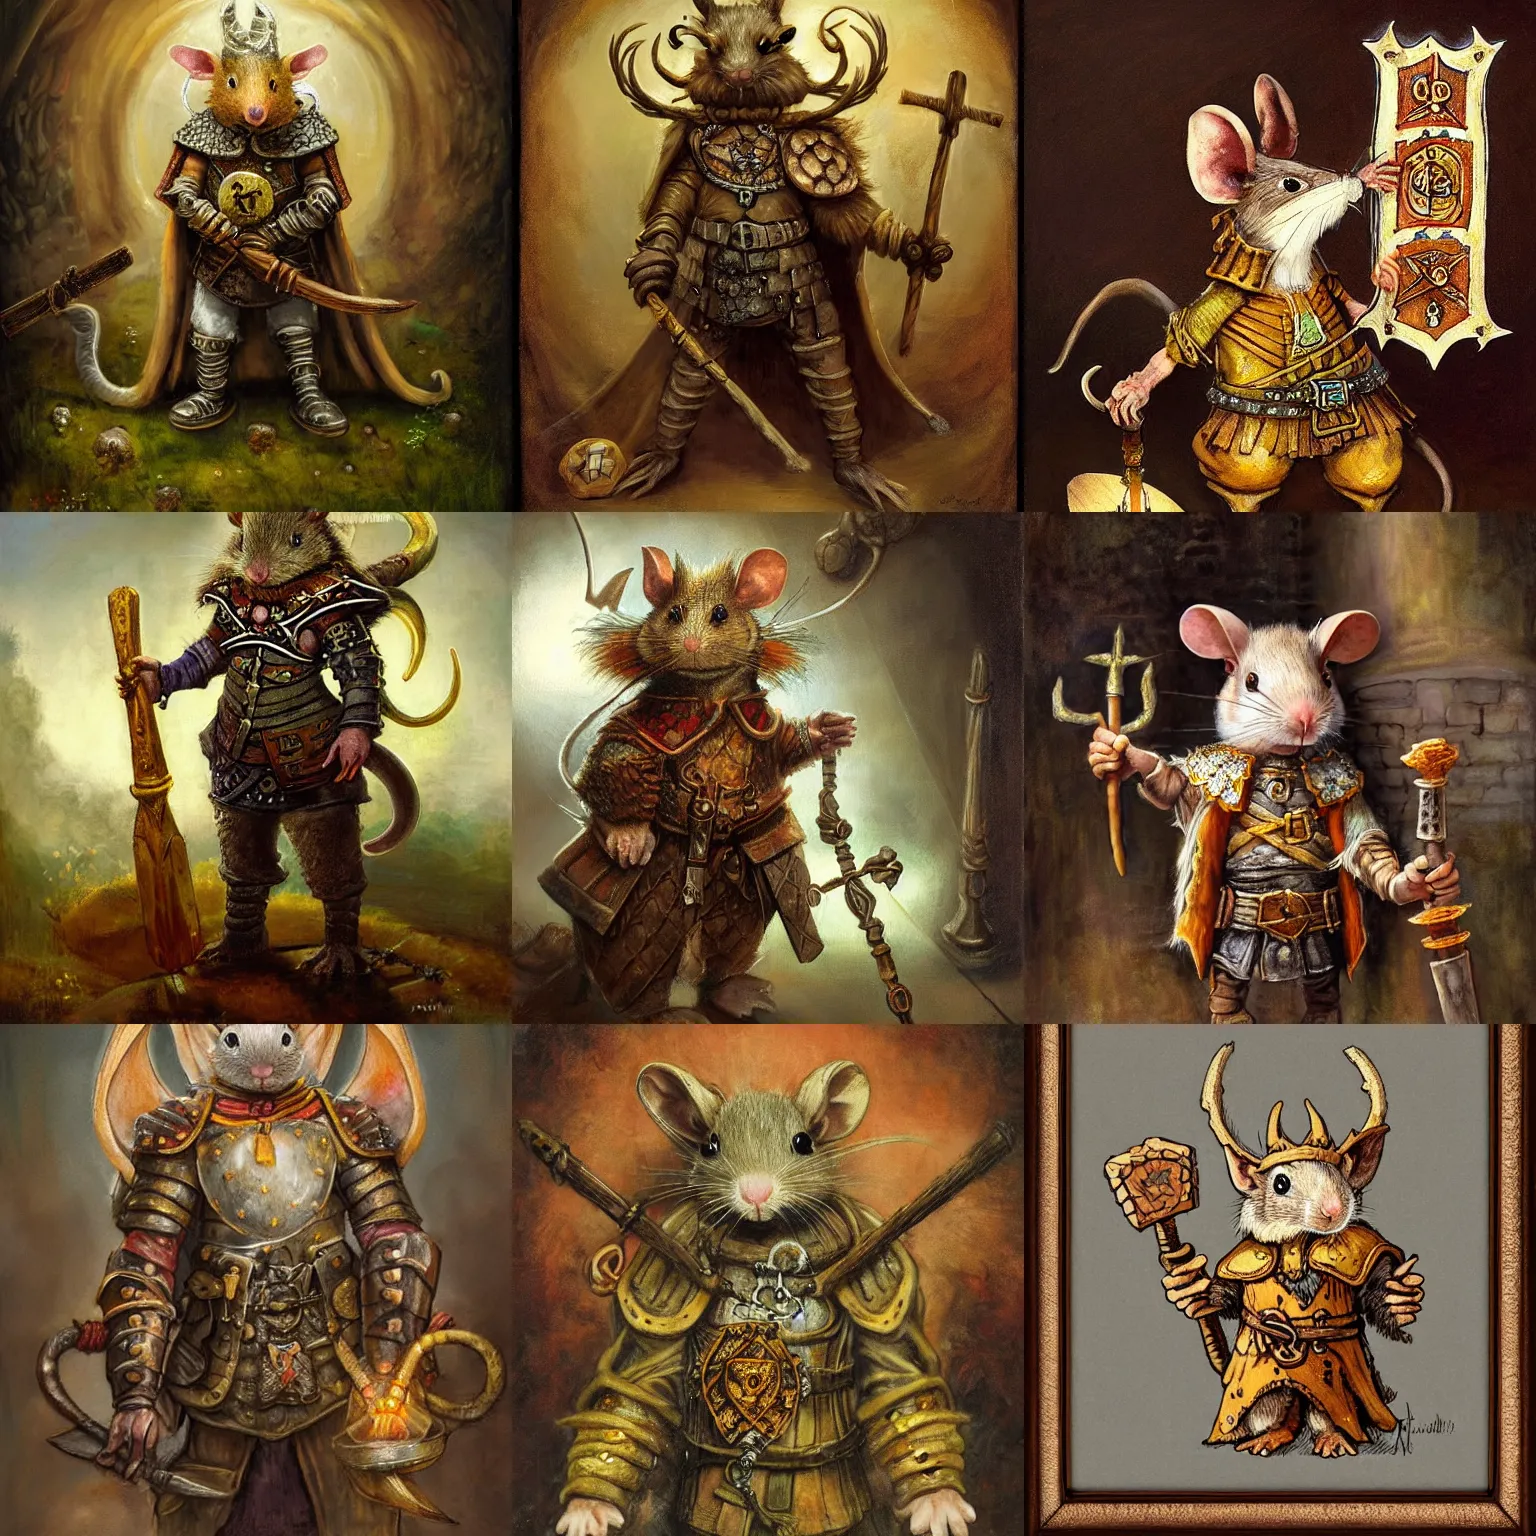 Prompt: a rat wearing a dnd cleric's outfit, druidic runes, mushrooms and spores, soft portrait, complete with a tabard and suit of armor and intricate wooden staff, magical realism, rhads, ray swanland, gary chalk, ( rembrandt )